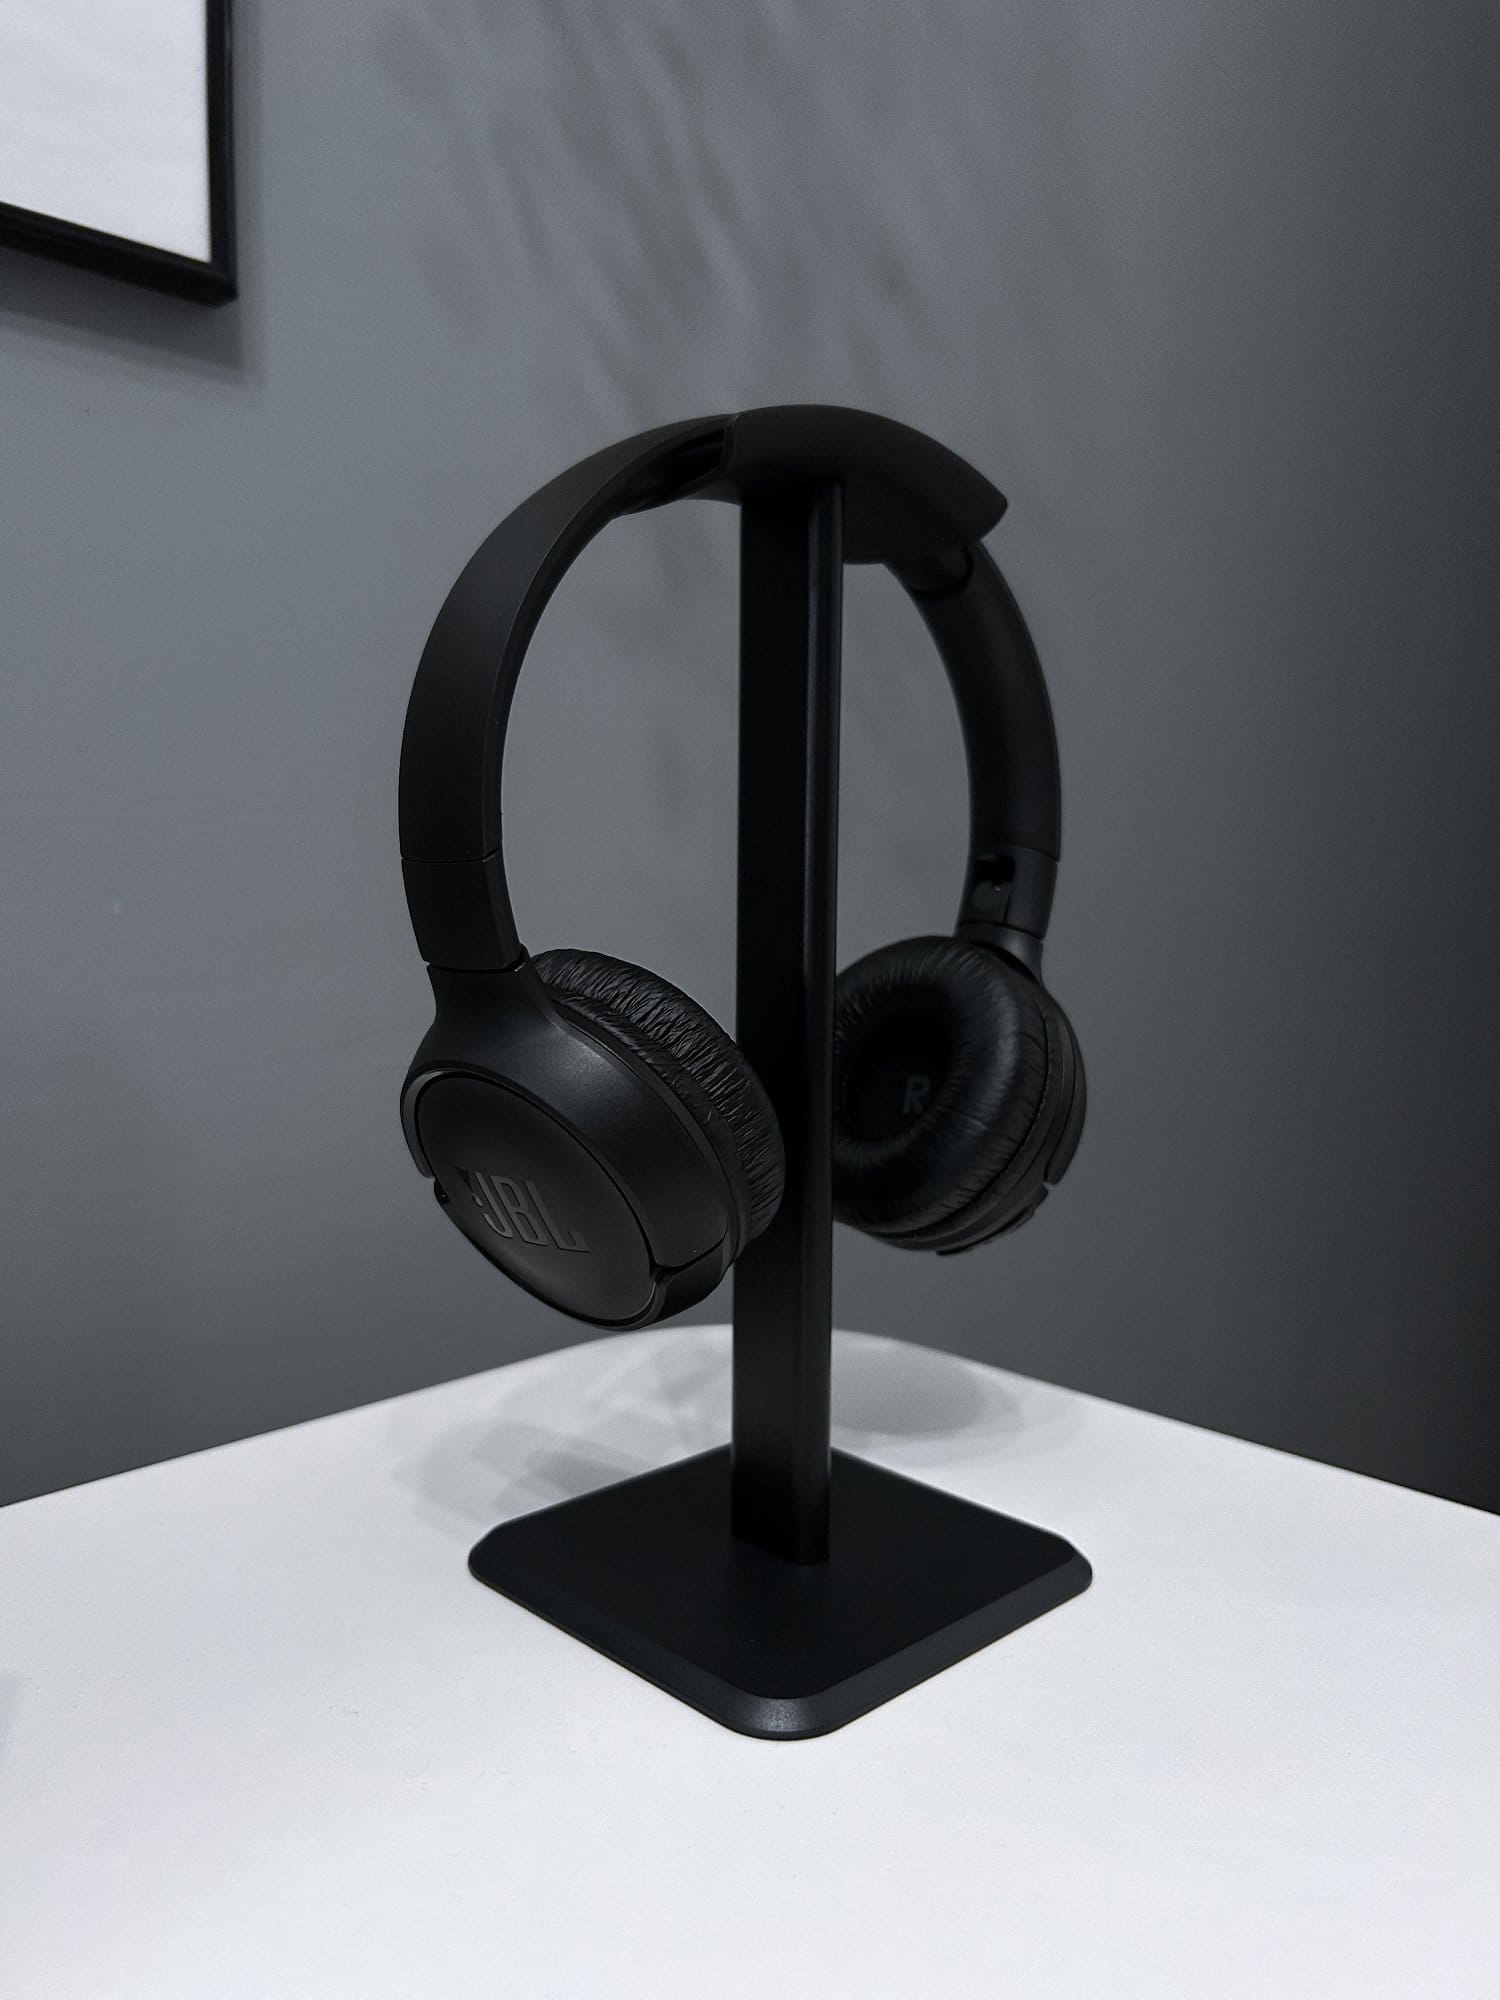 Black over-ear JBL headphones resting on a stand on a white surface against a grey background with a framed picture partially visible